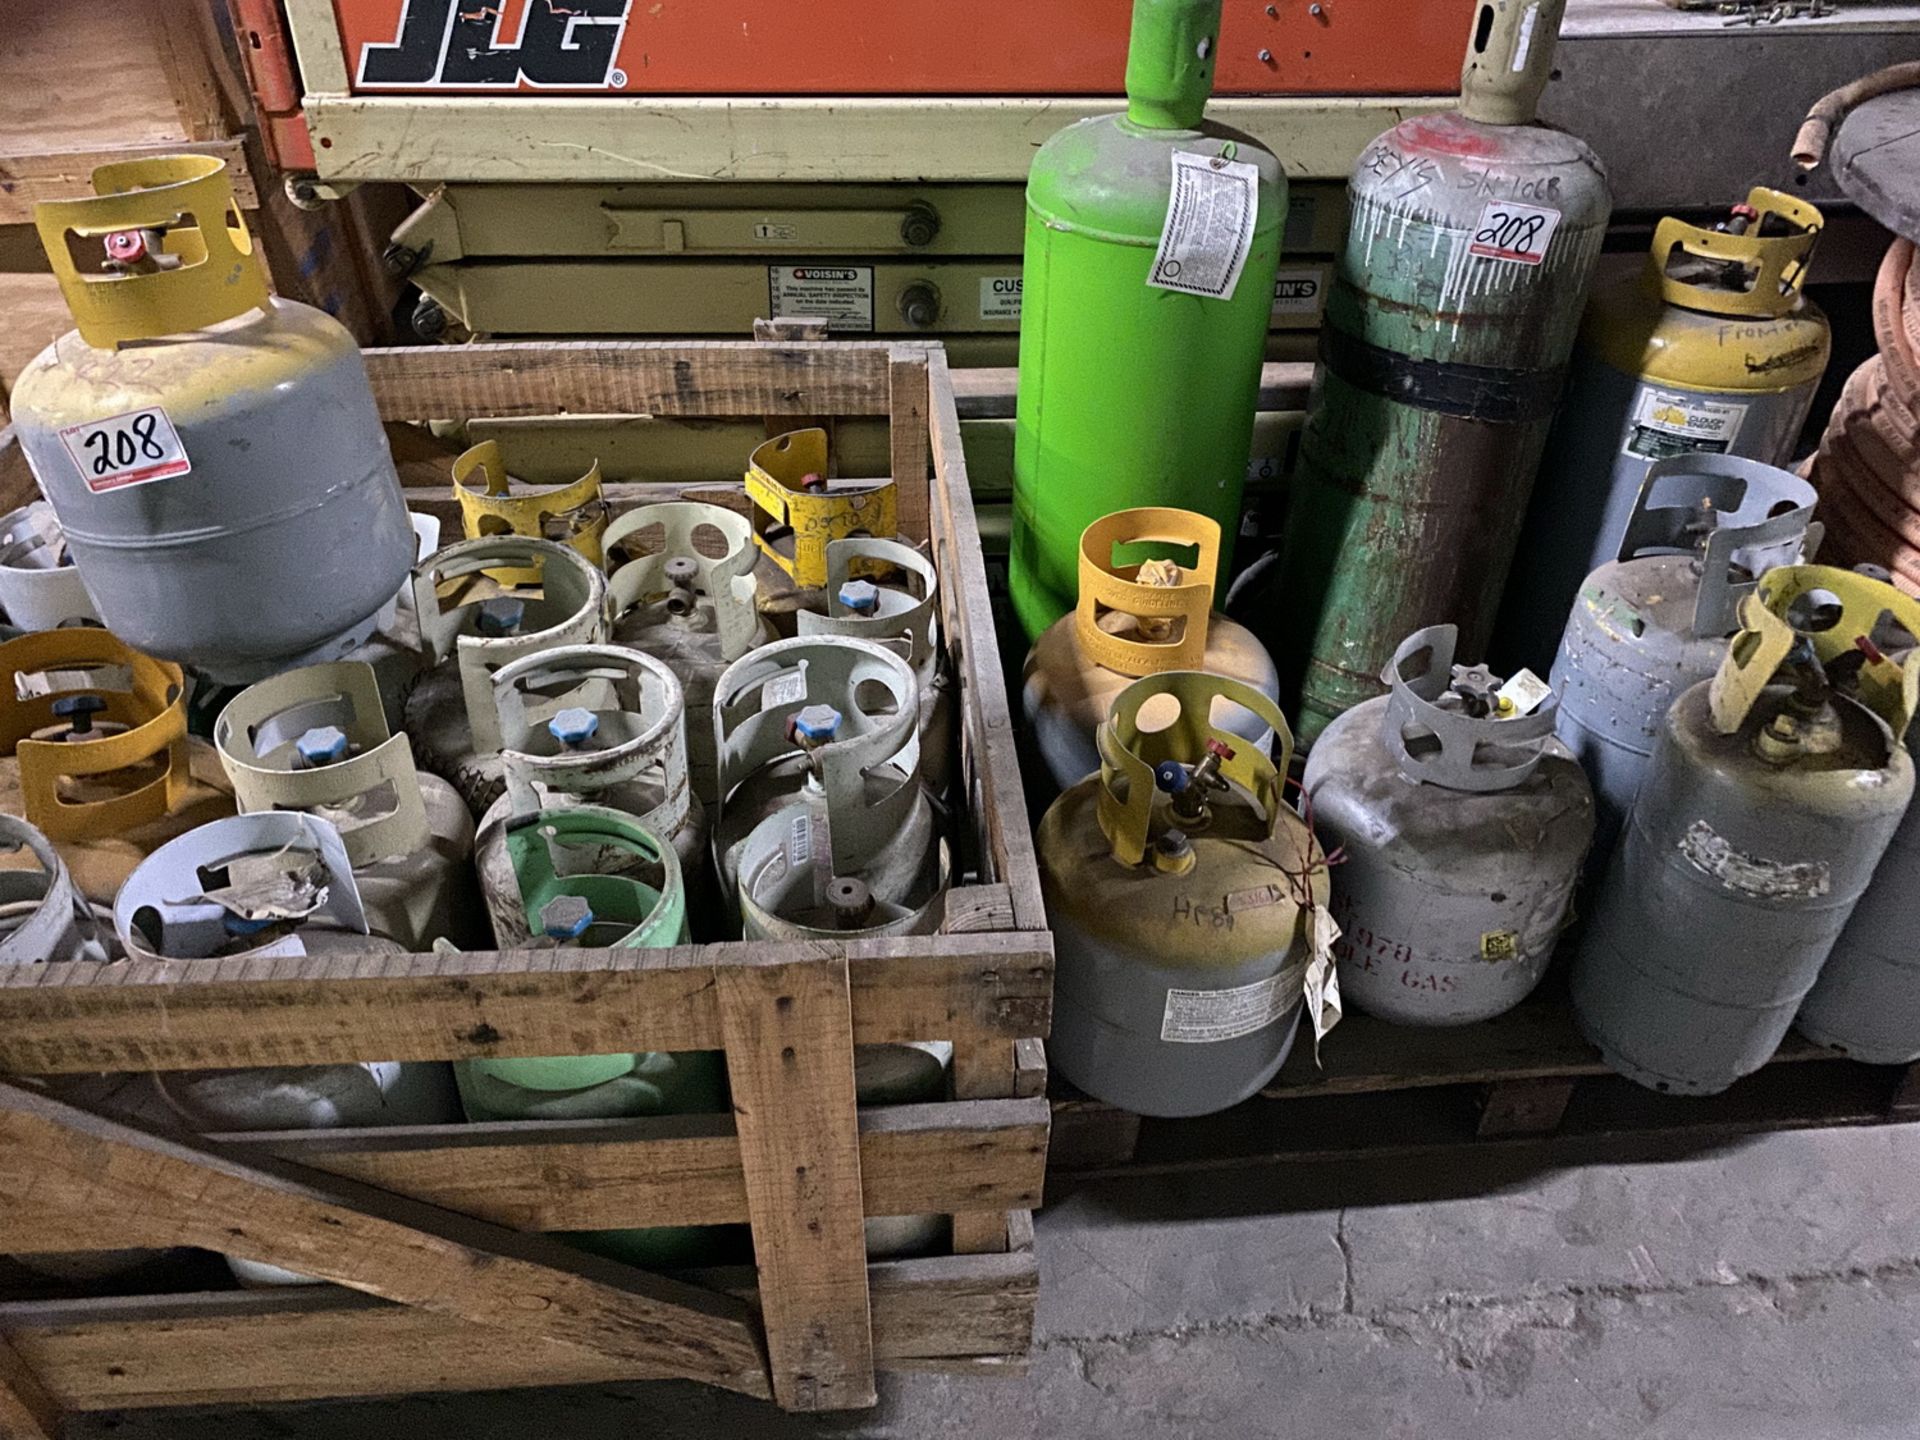 LOT - ASSORTED EMPTY PROPANE AND GAS TANKS AND CYLINDERS (2 SKIDS)